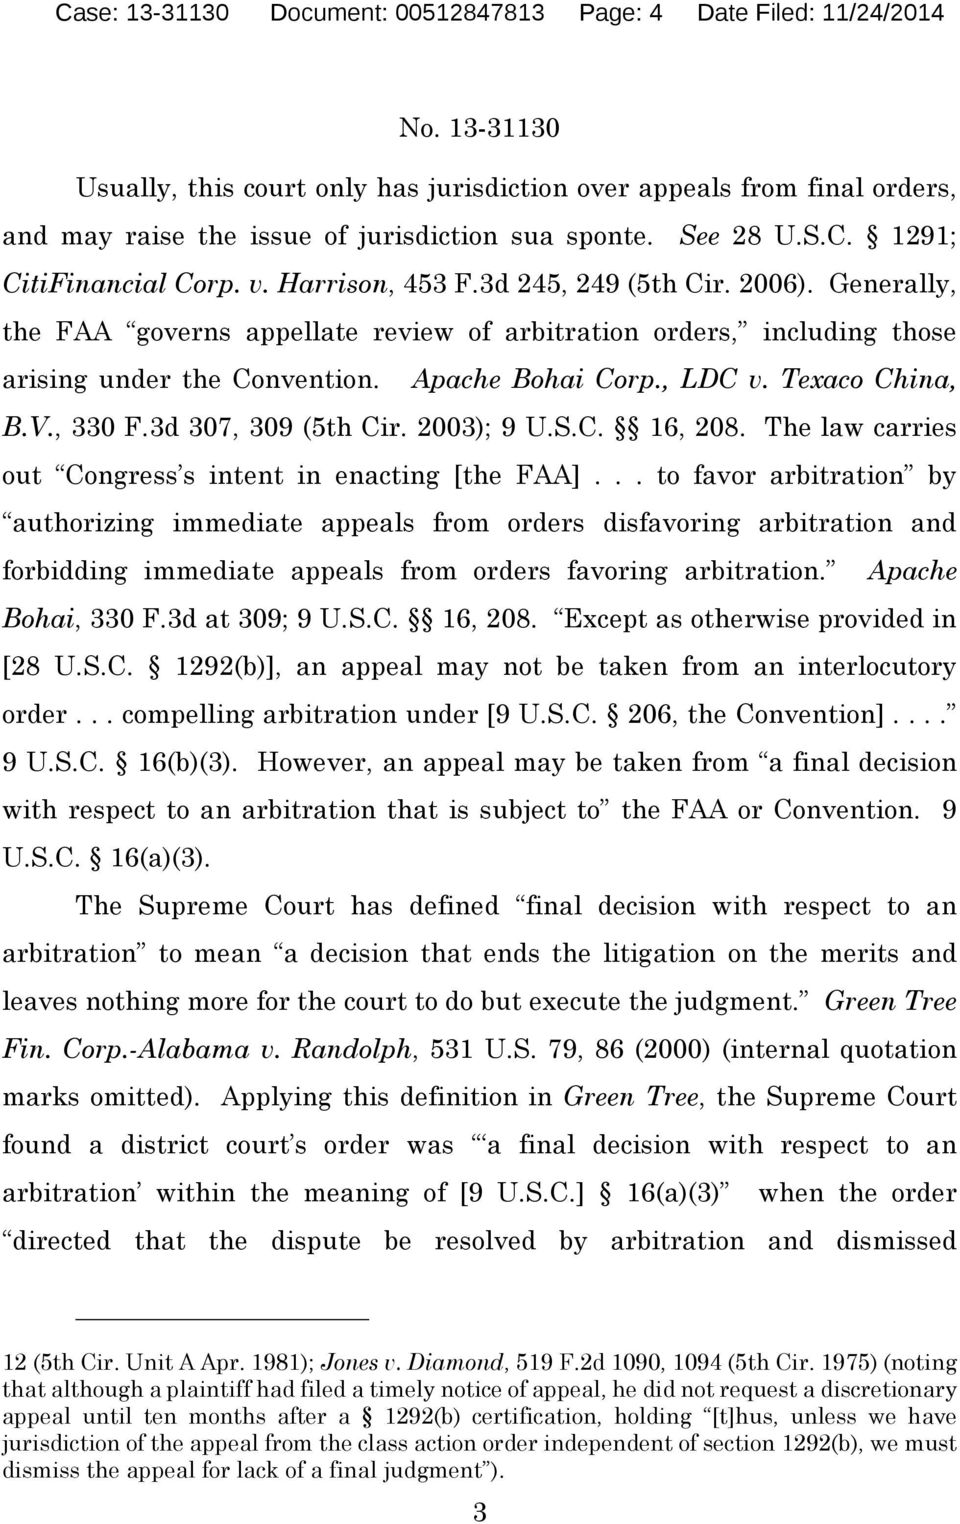 Apache Bohai Corp., LDC v. Texaco China, B.V., 330 F.3d 307, 309 (5th Cir. 2003); 9 U.S.C. 16, 208. The law carries out Congress s intent in enacting [the FAA].